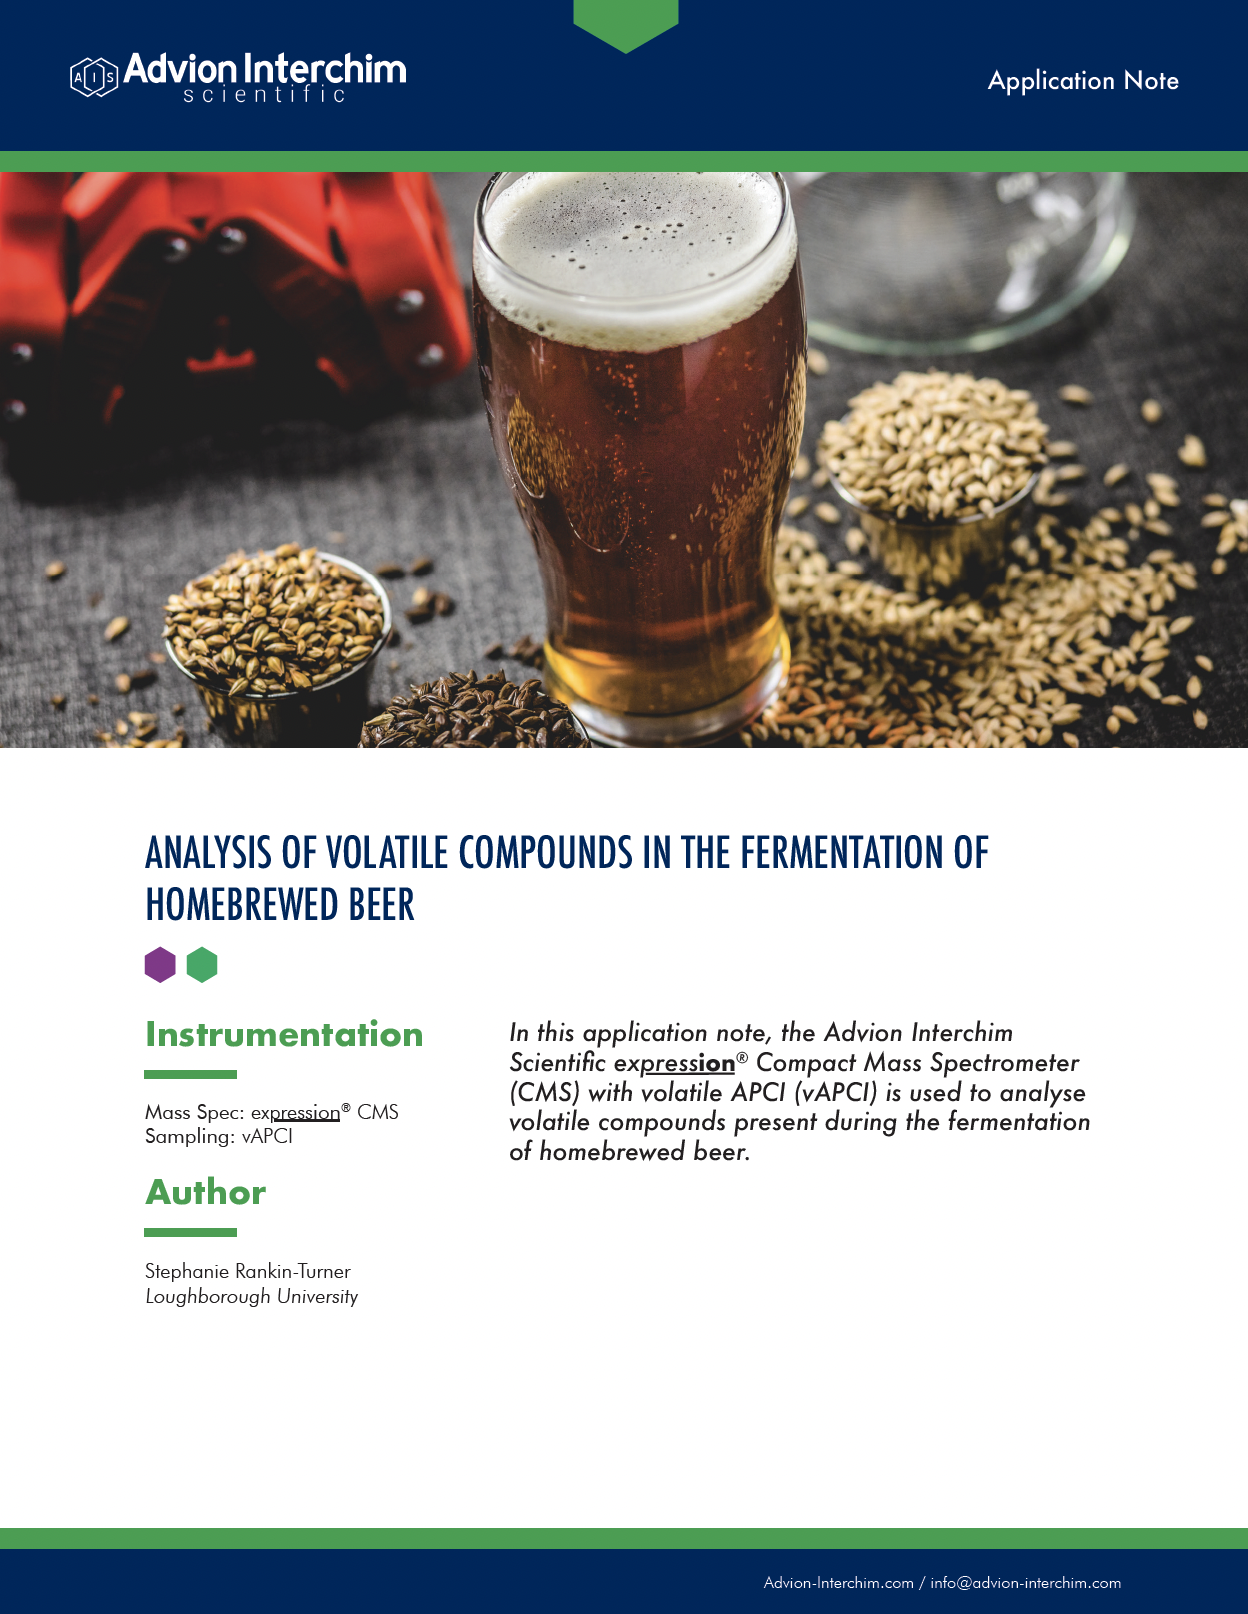 Analysis of Volatile Compounds in the Fermentation of Homebrewed Beer